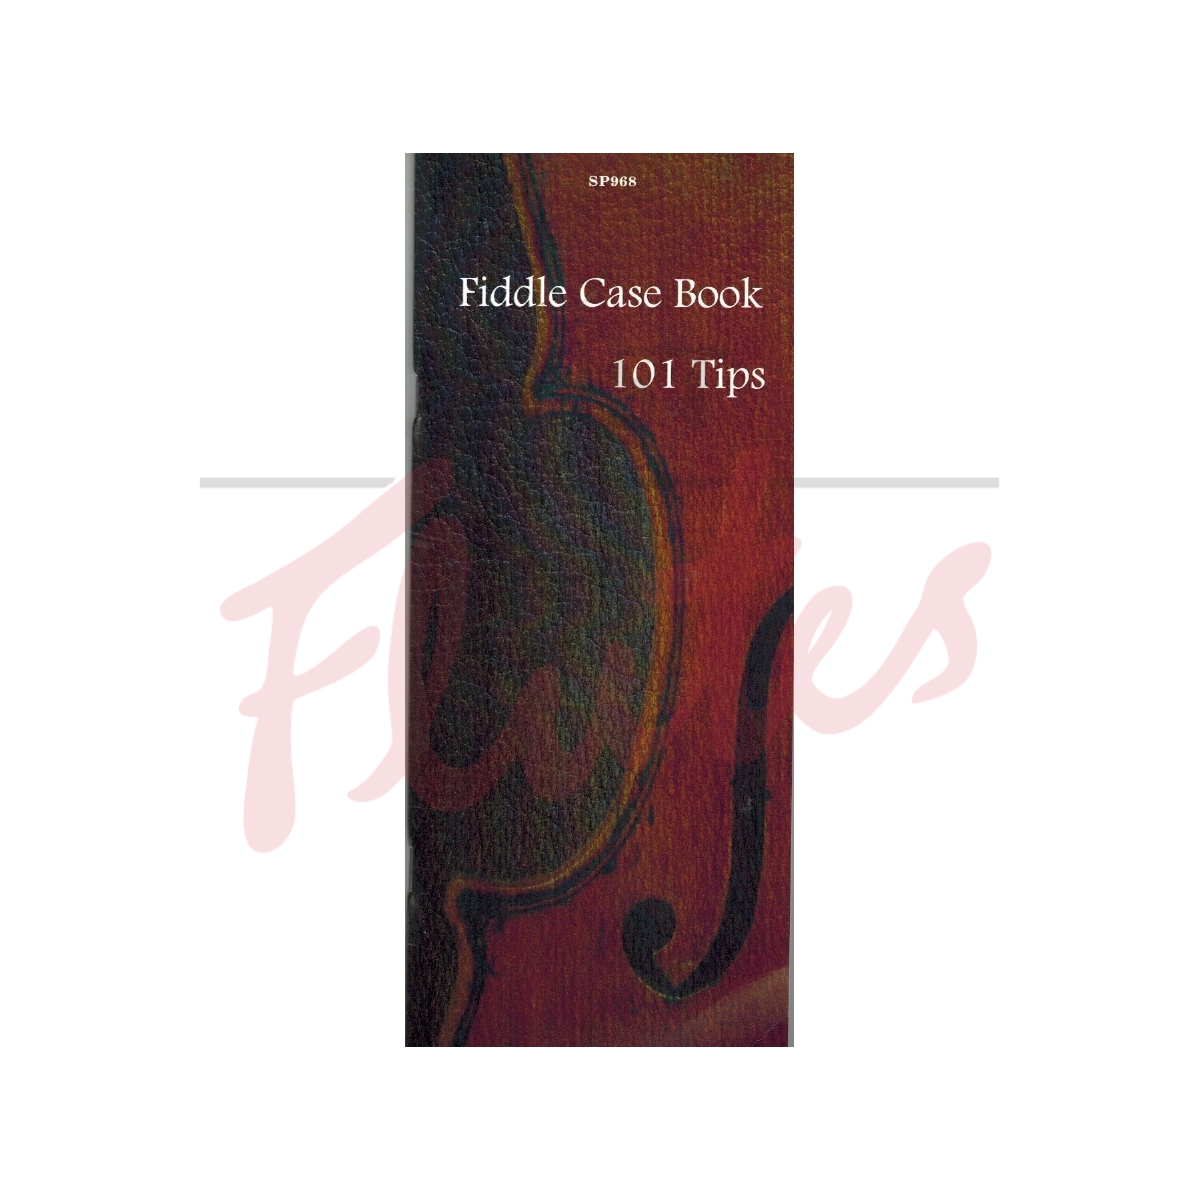 Fiddle Case Book - 101 Tips